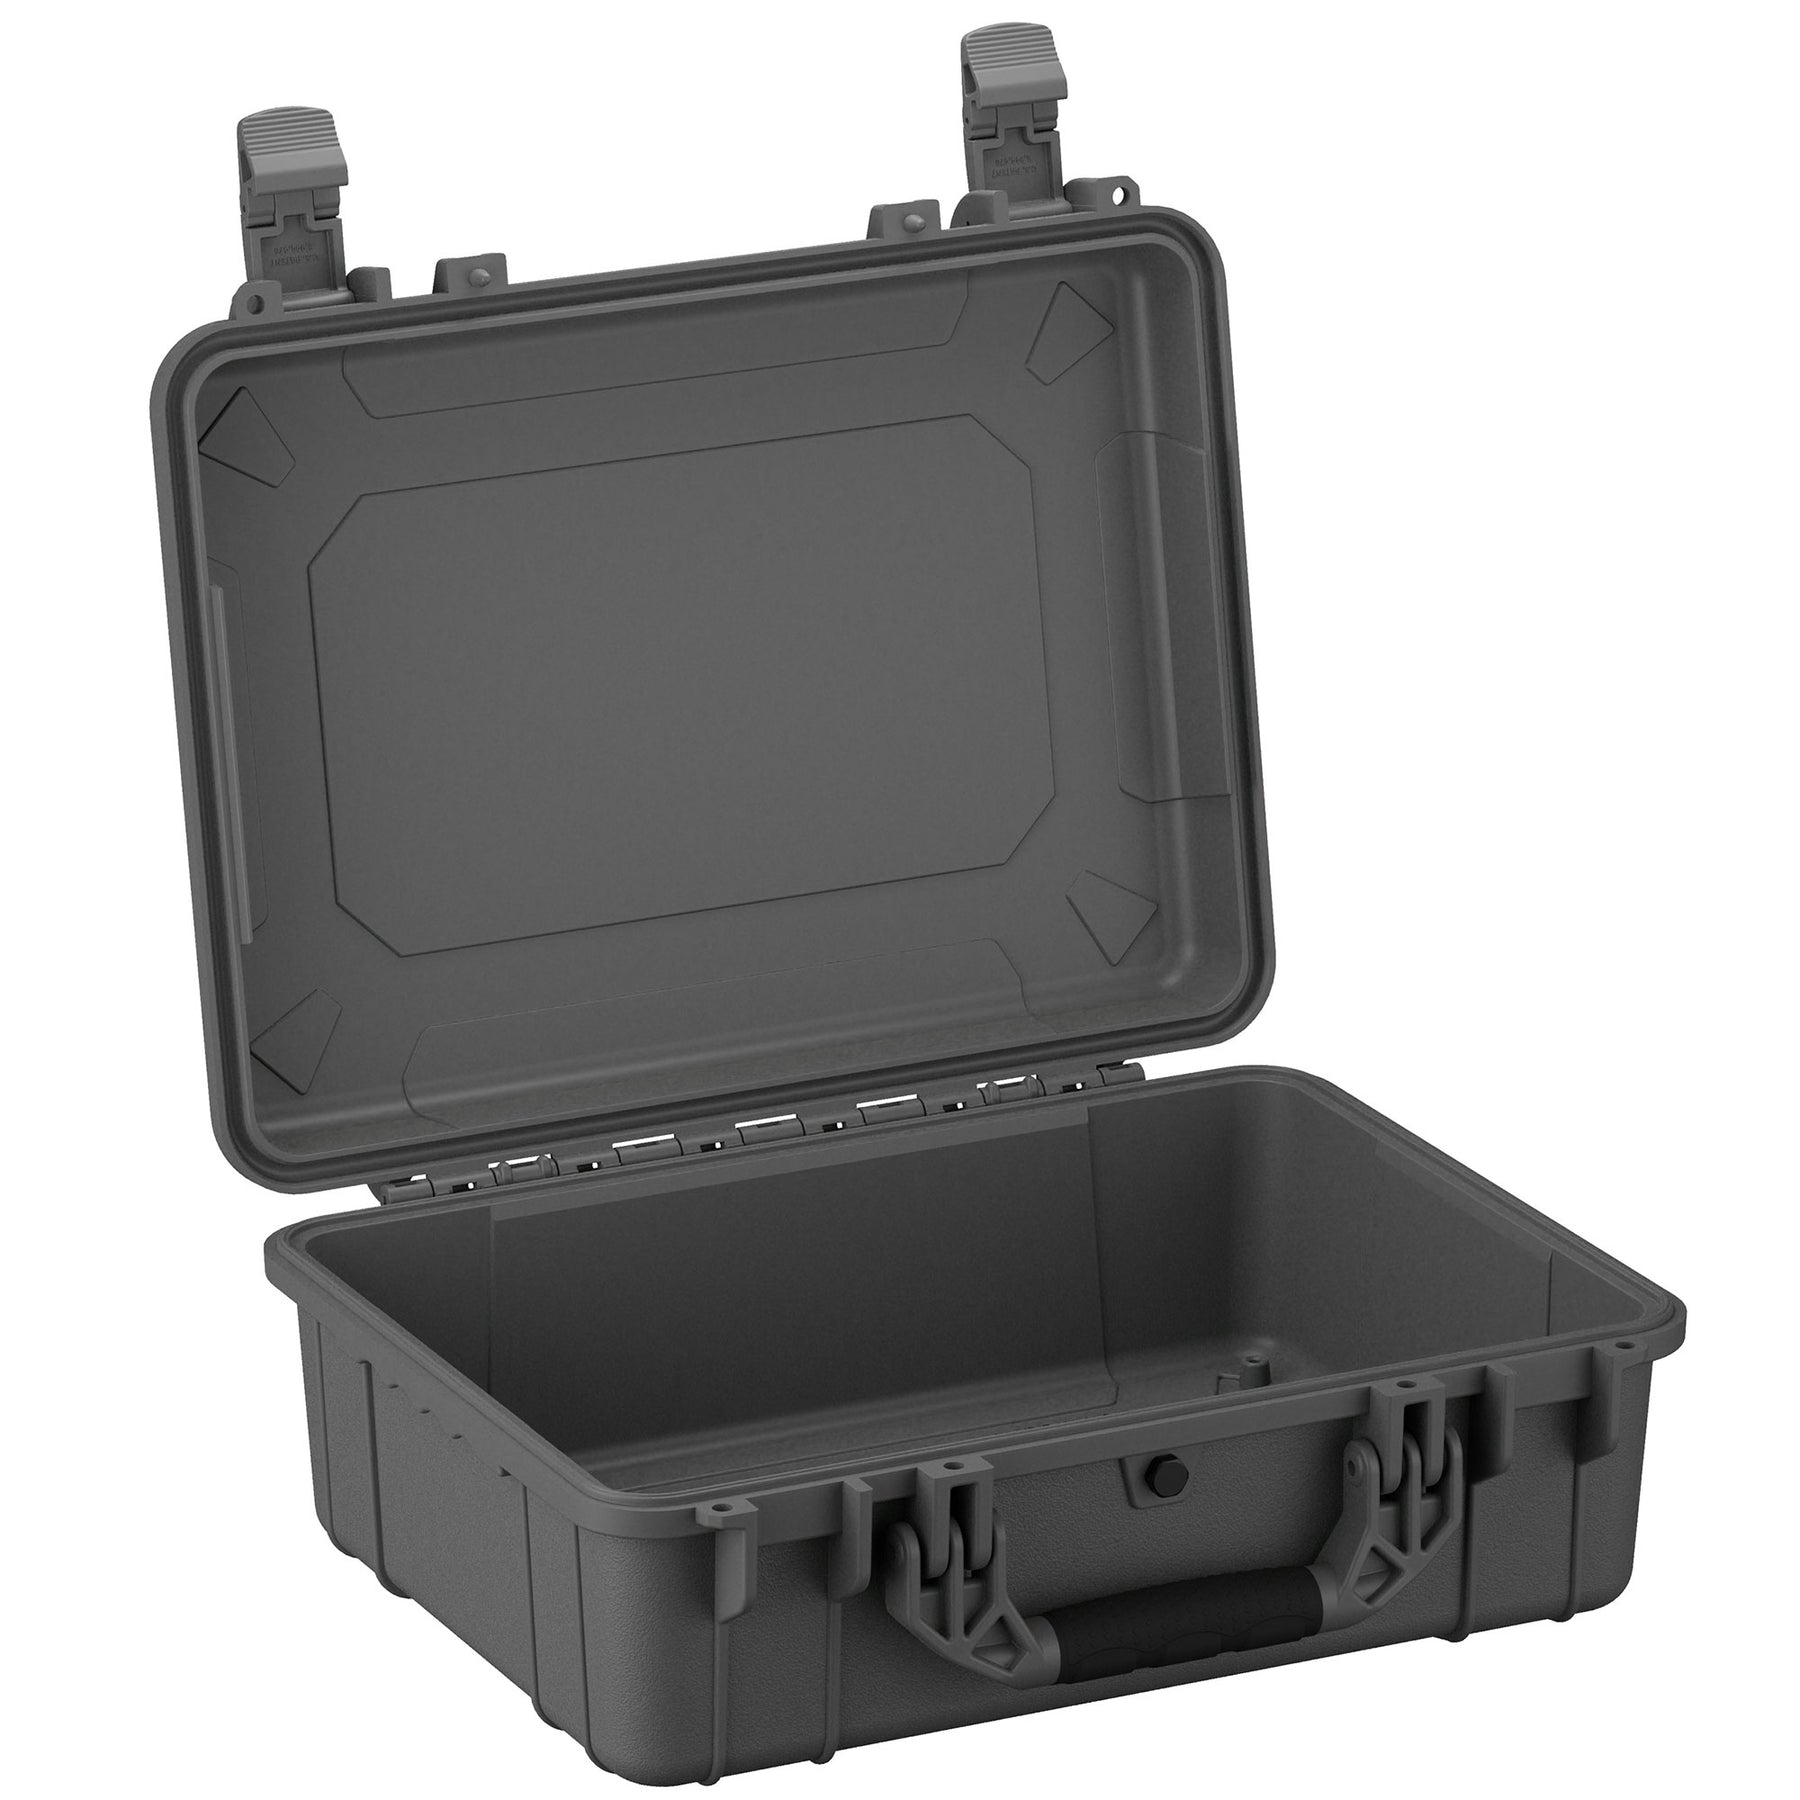 Carry Cases: 20+ Plastic Carrying Case Options & Foam